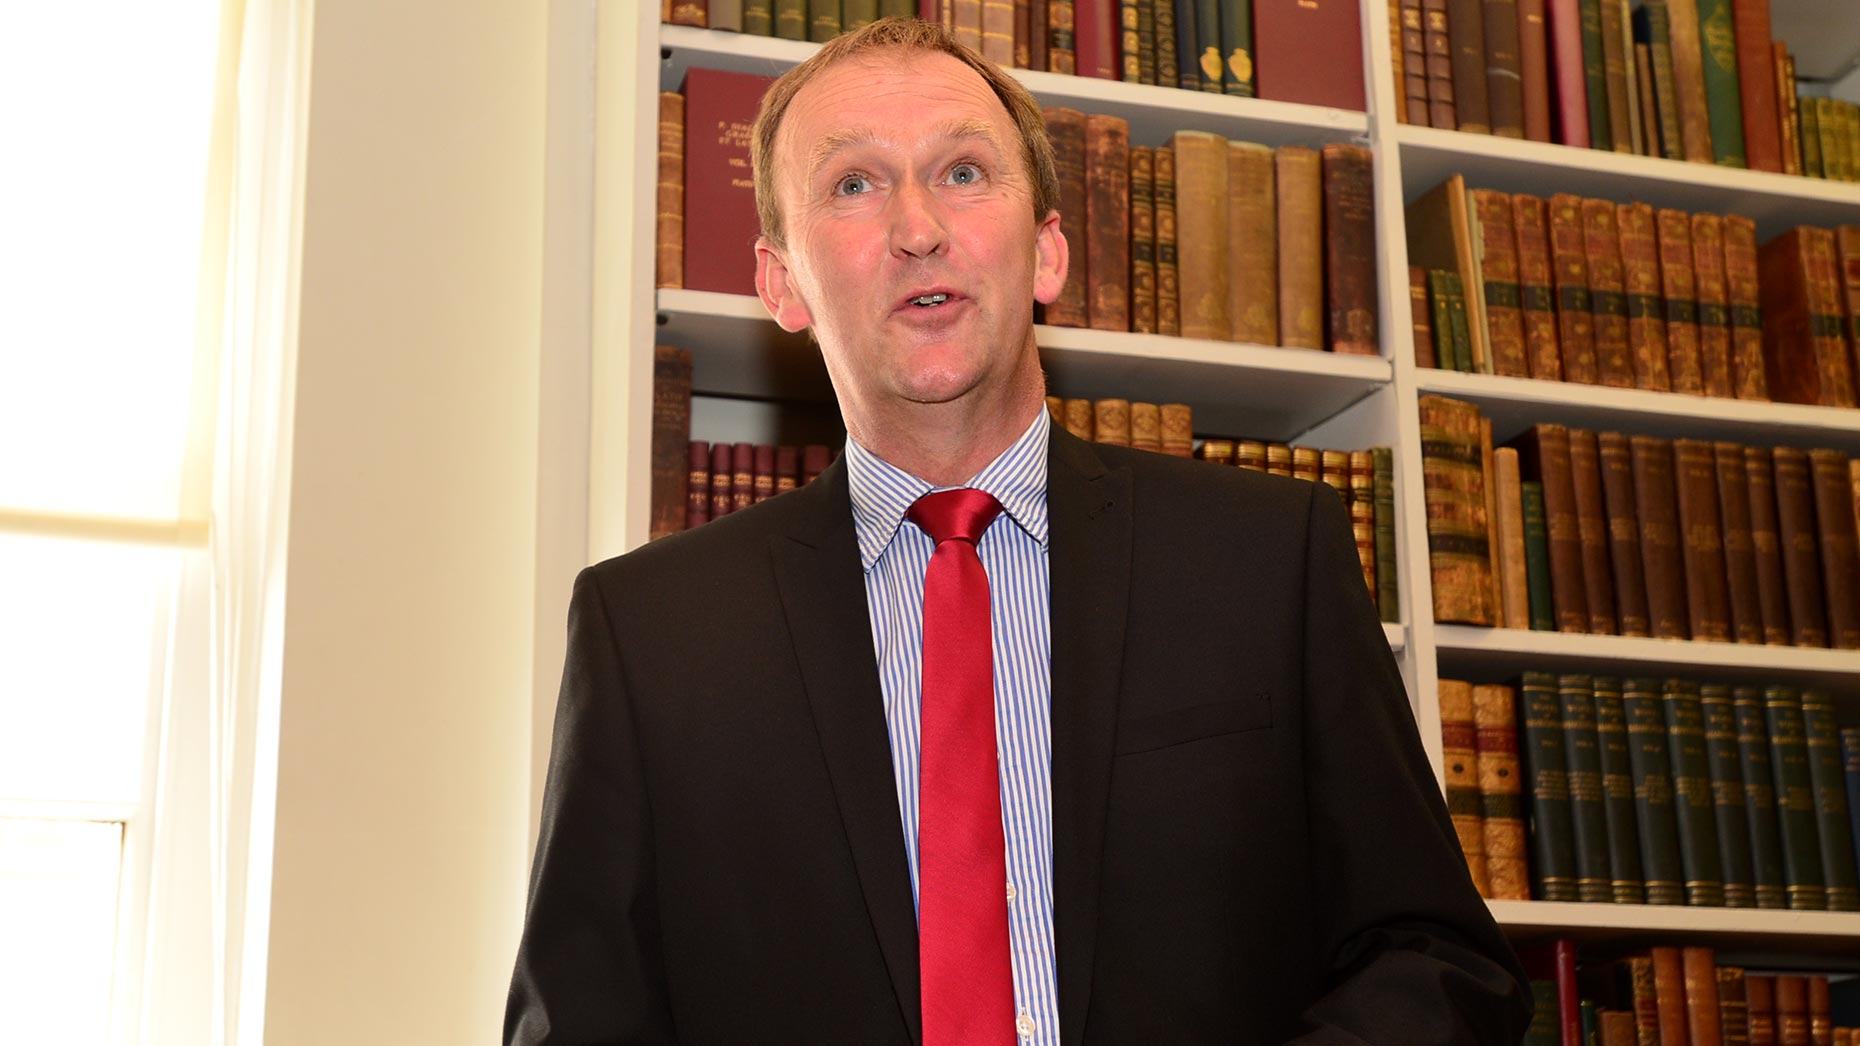 Councillor Nick Worth. Photo: Steve Smailes for The Lincolnite